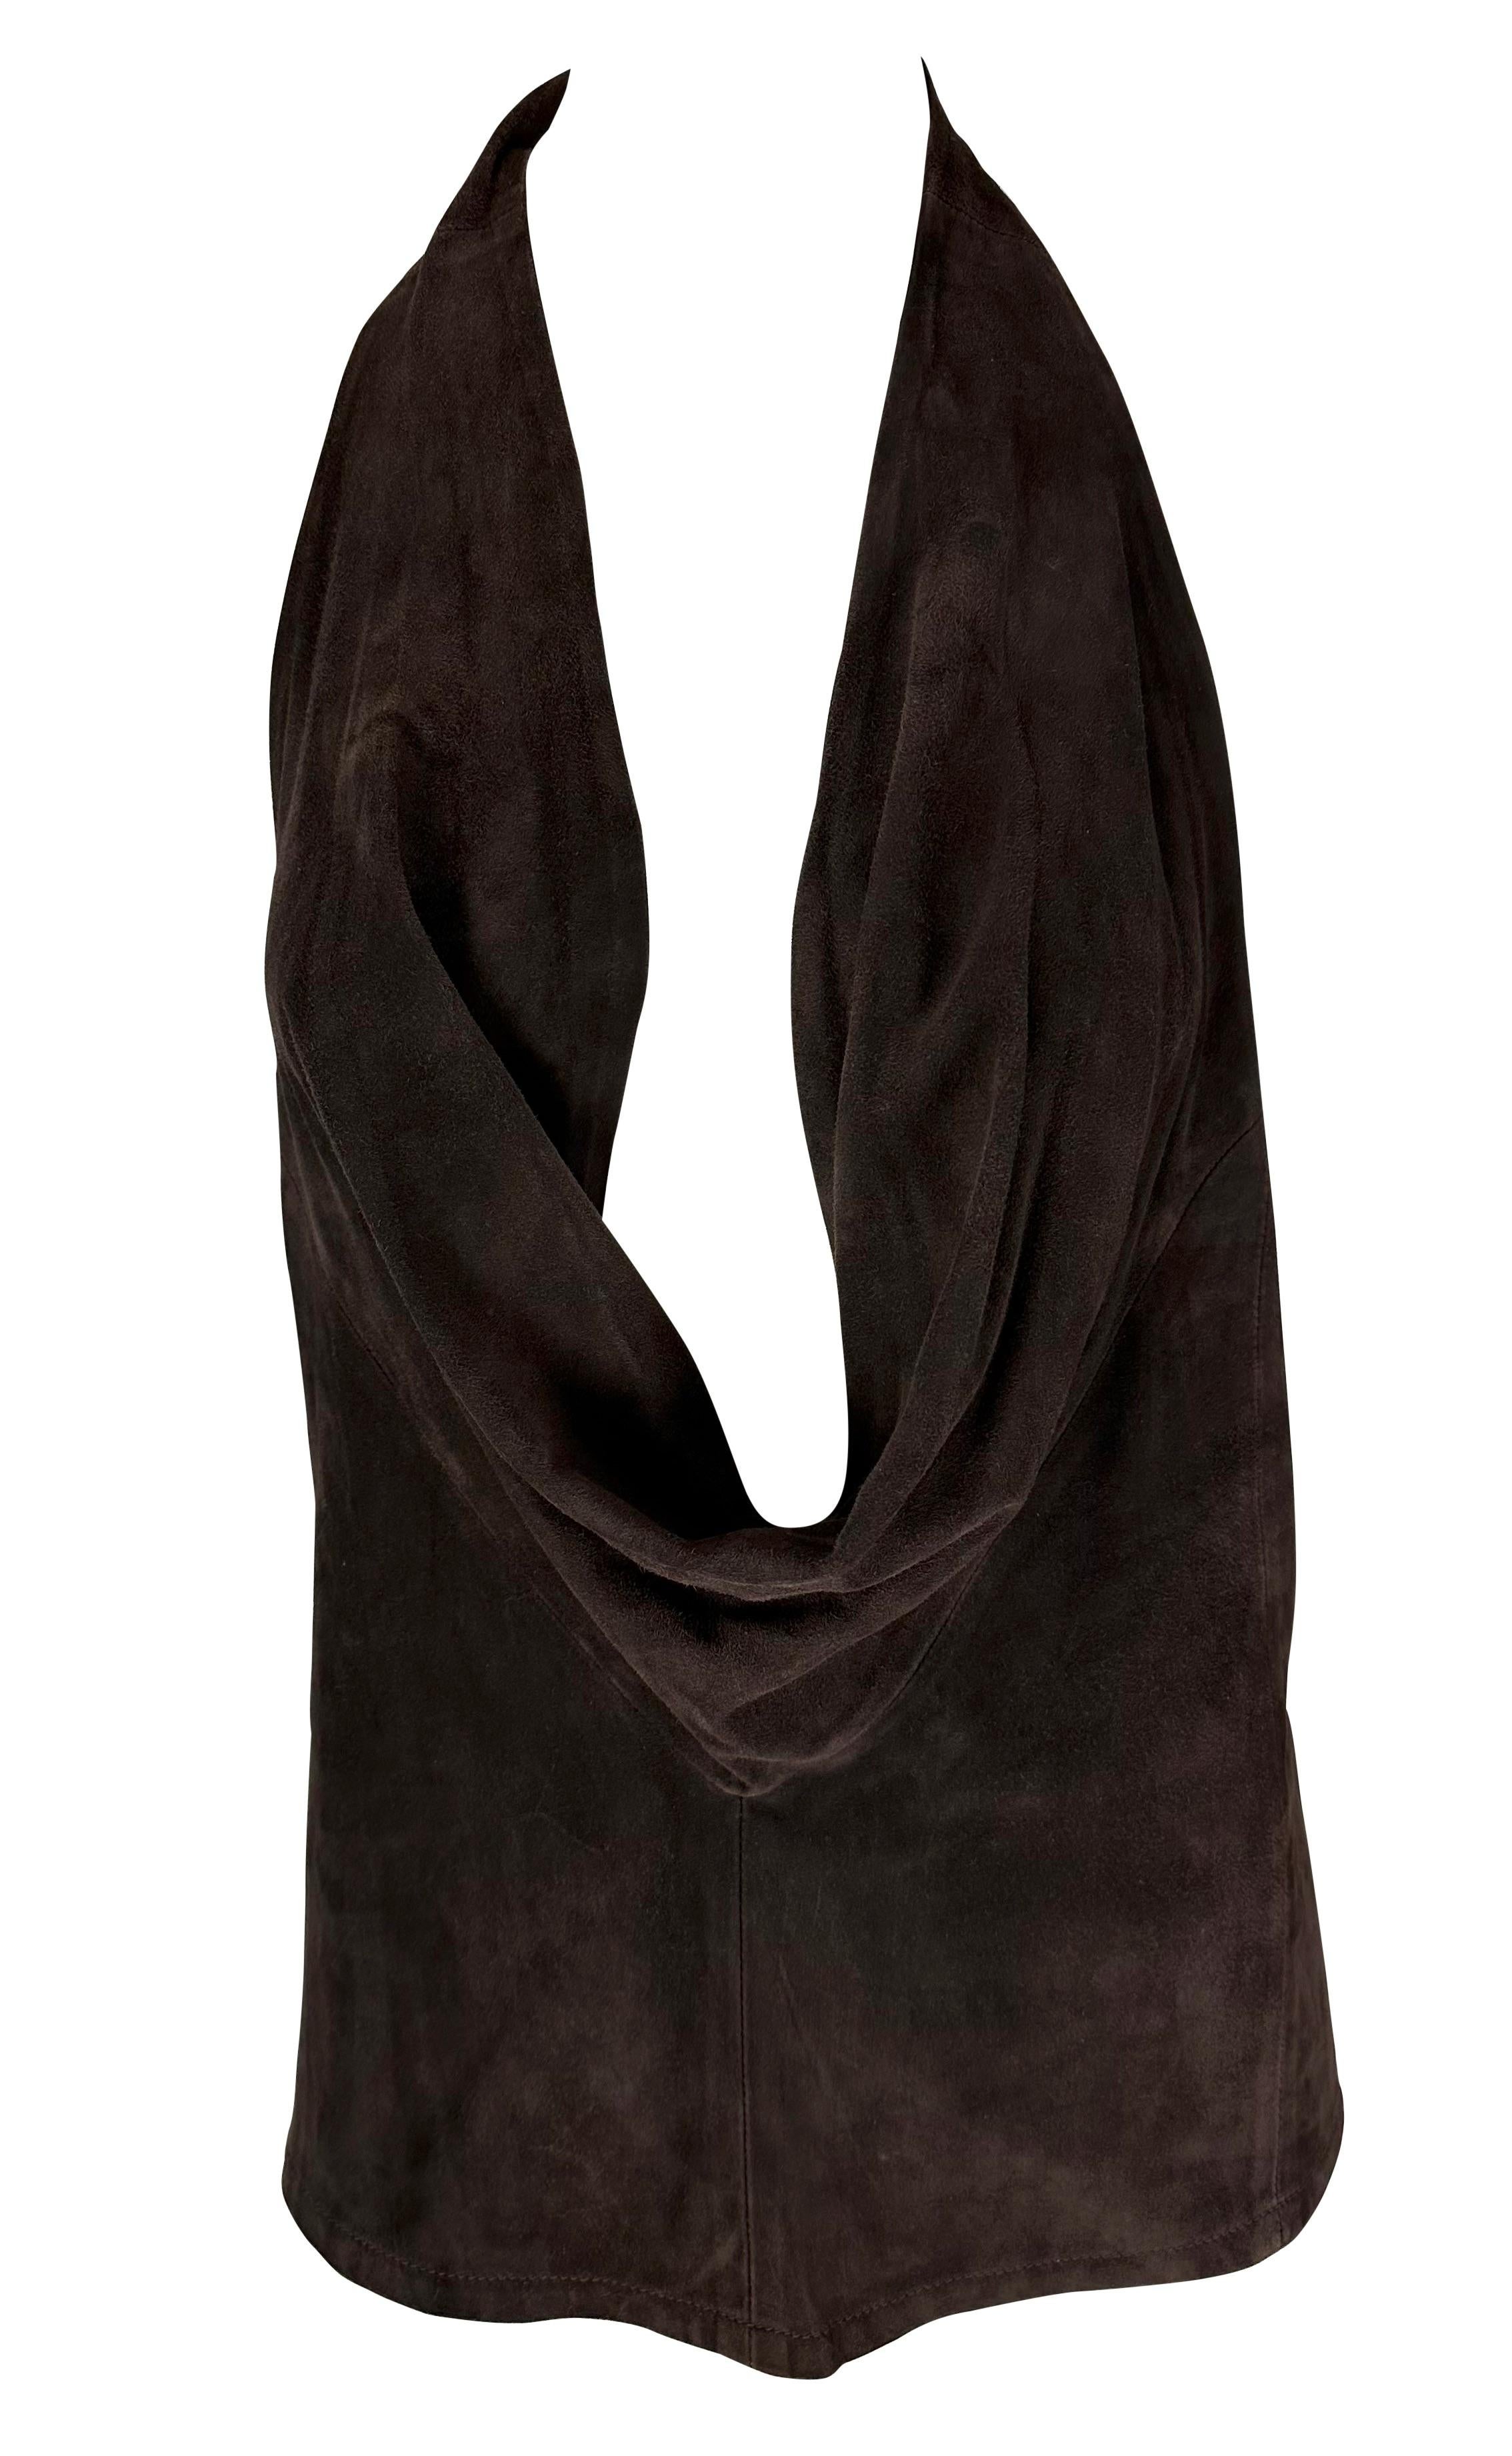 S/S 1997 Gucci by Tom Ford Brown Suede Brown Cowl Neck Halter Top Blouse Backless 2